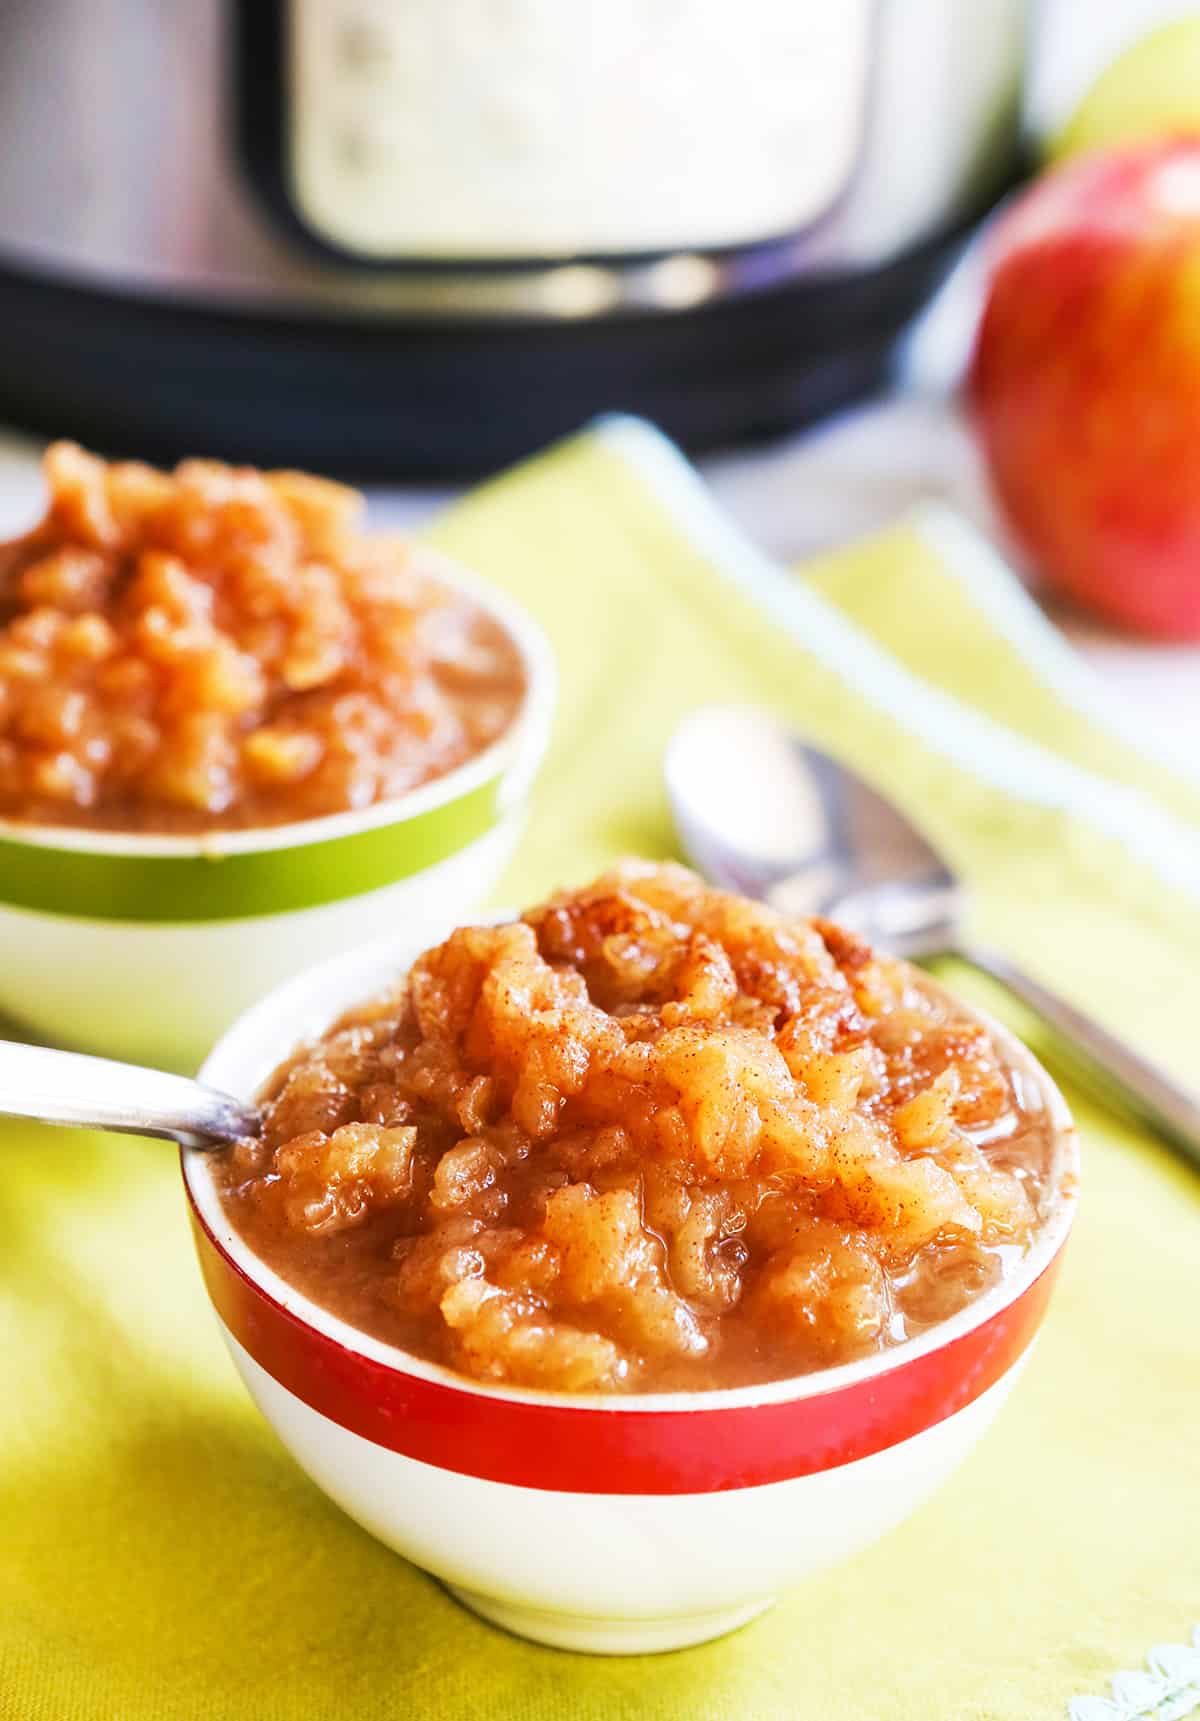 spoon inserted into a small bowl of instant pot applesauce.